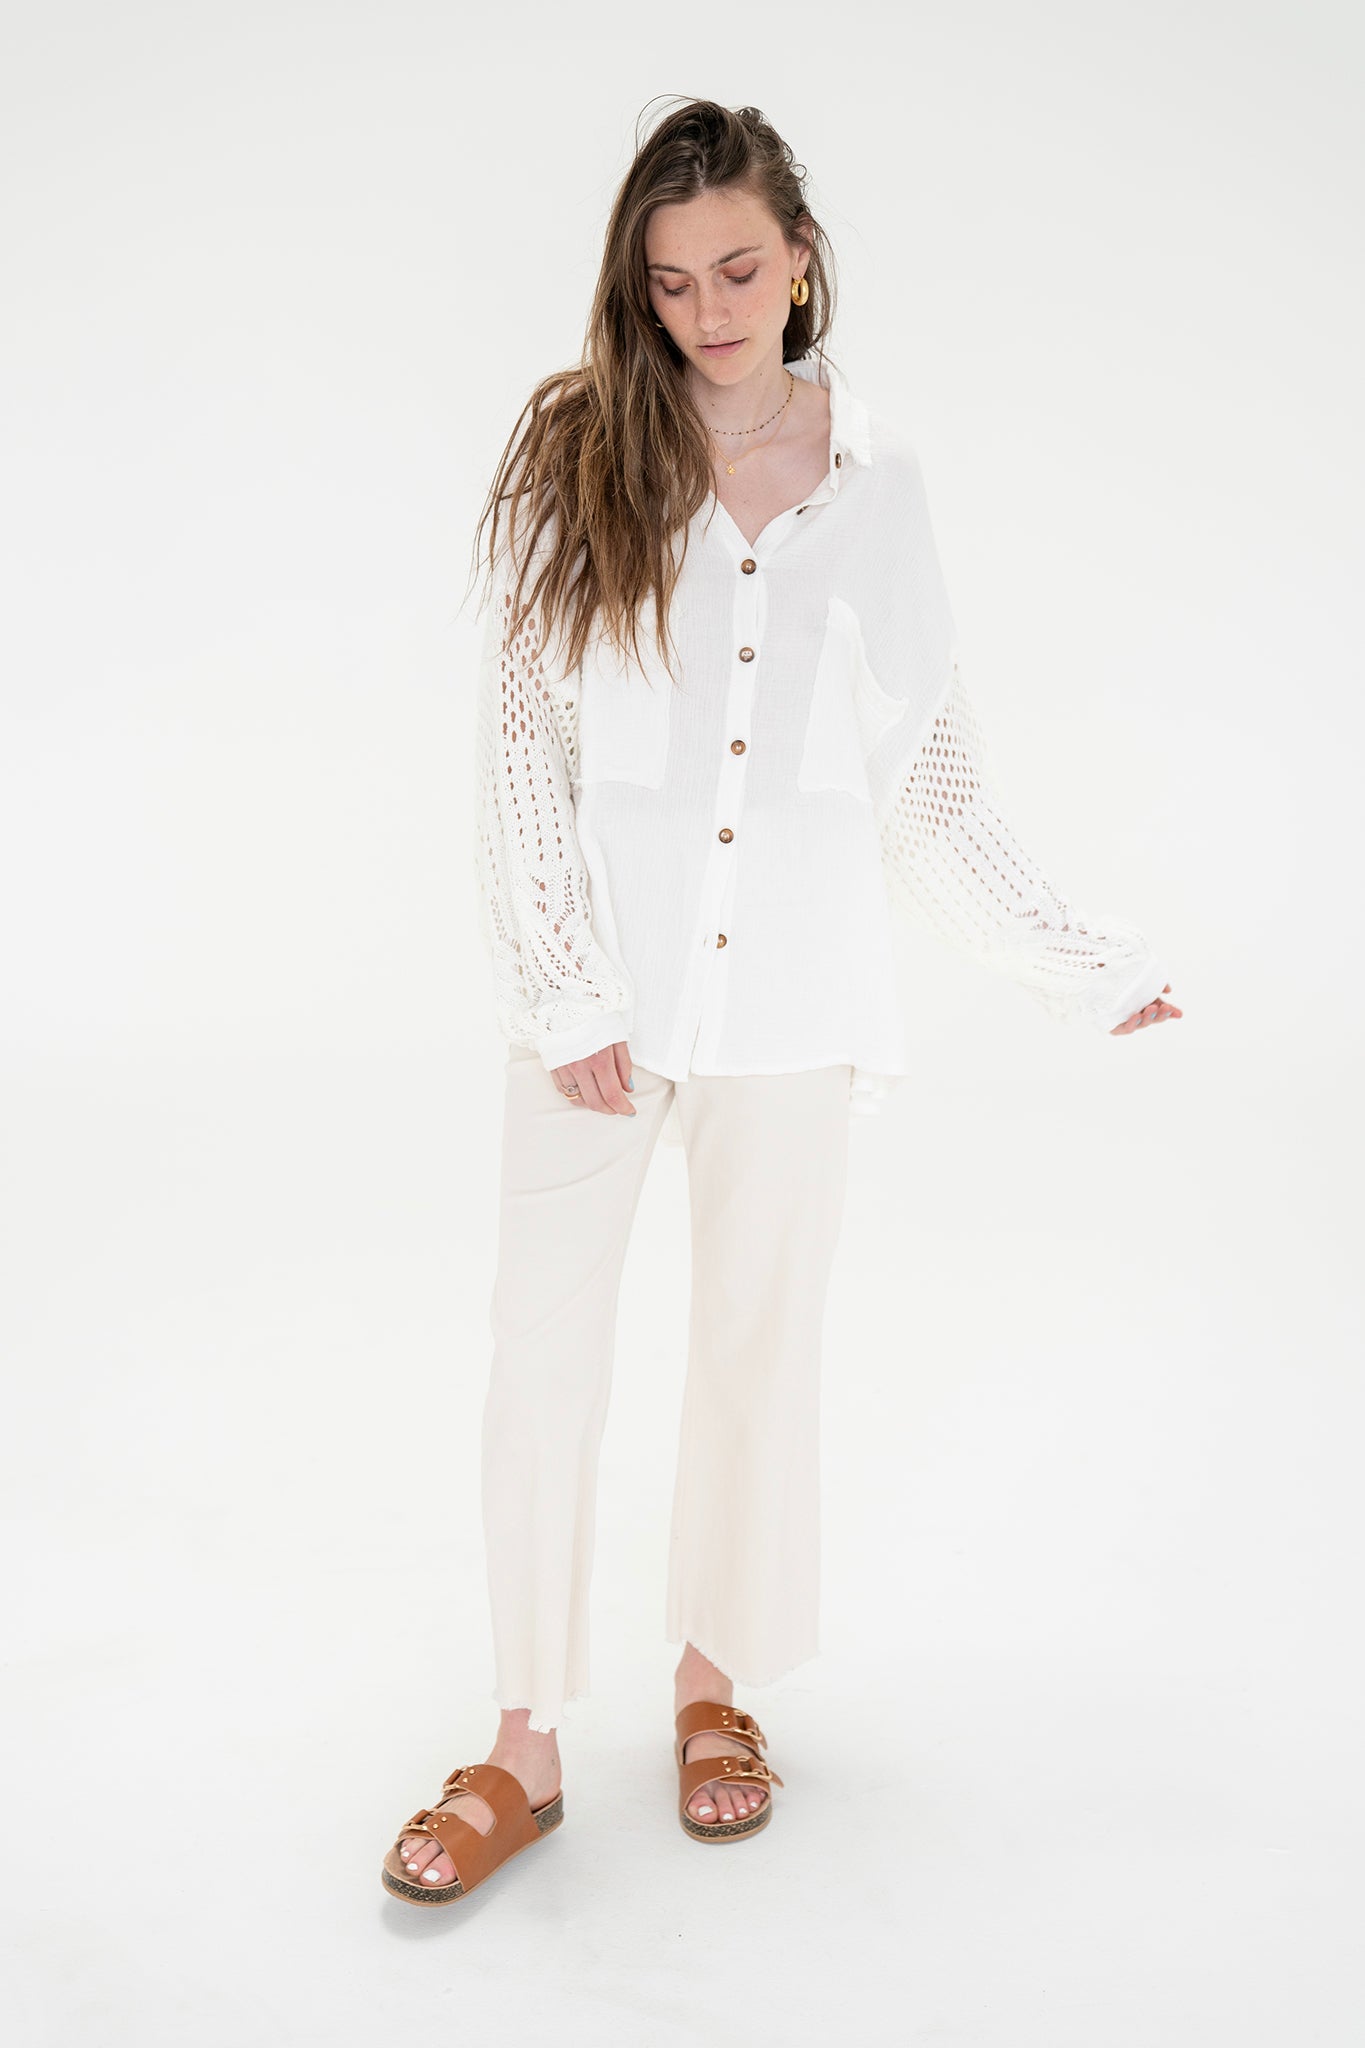 View 6 of Wisteria Cardigan in Off White, a Sweaters from Larrea Cove. Detail: .